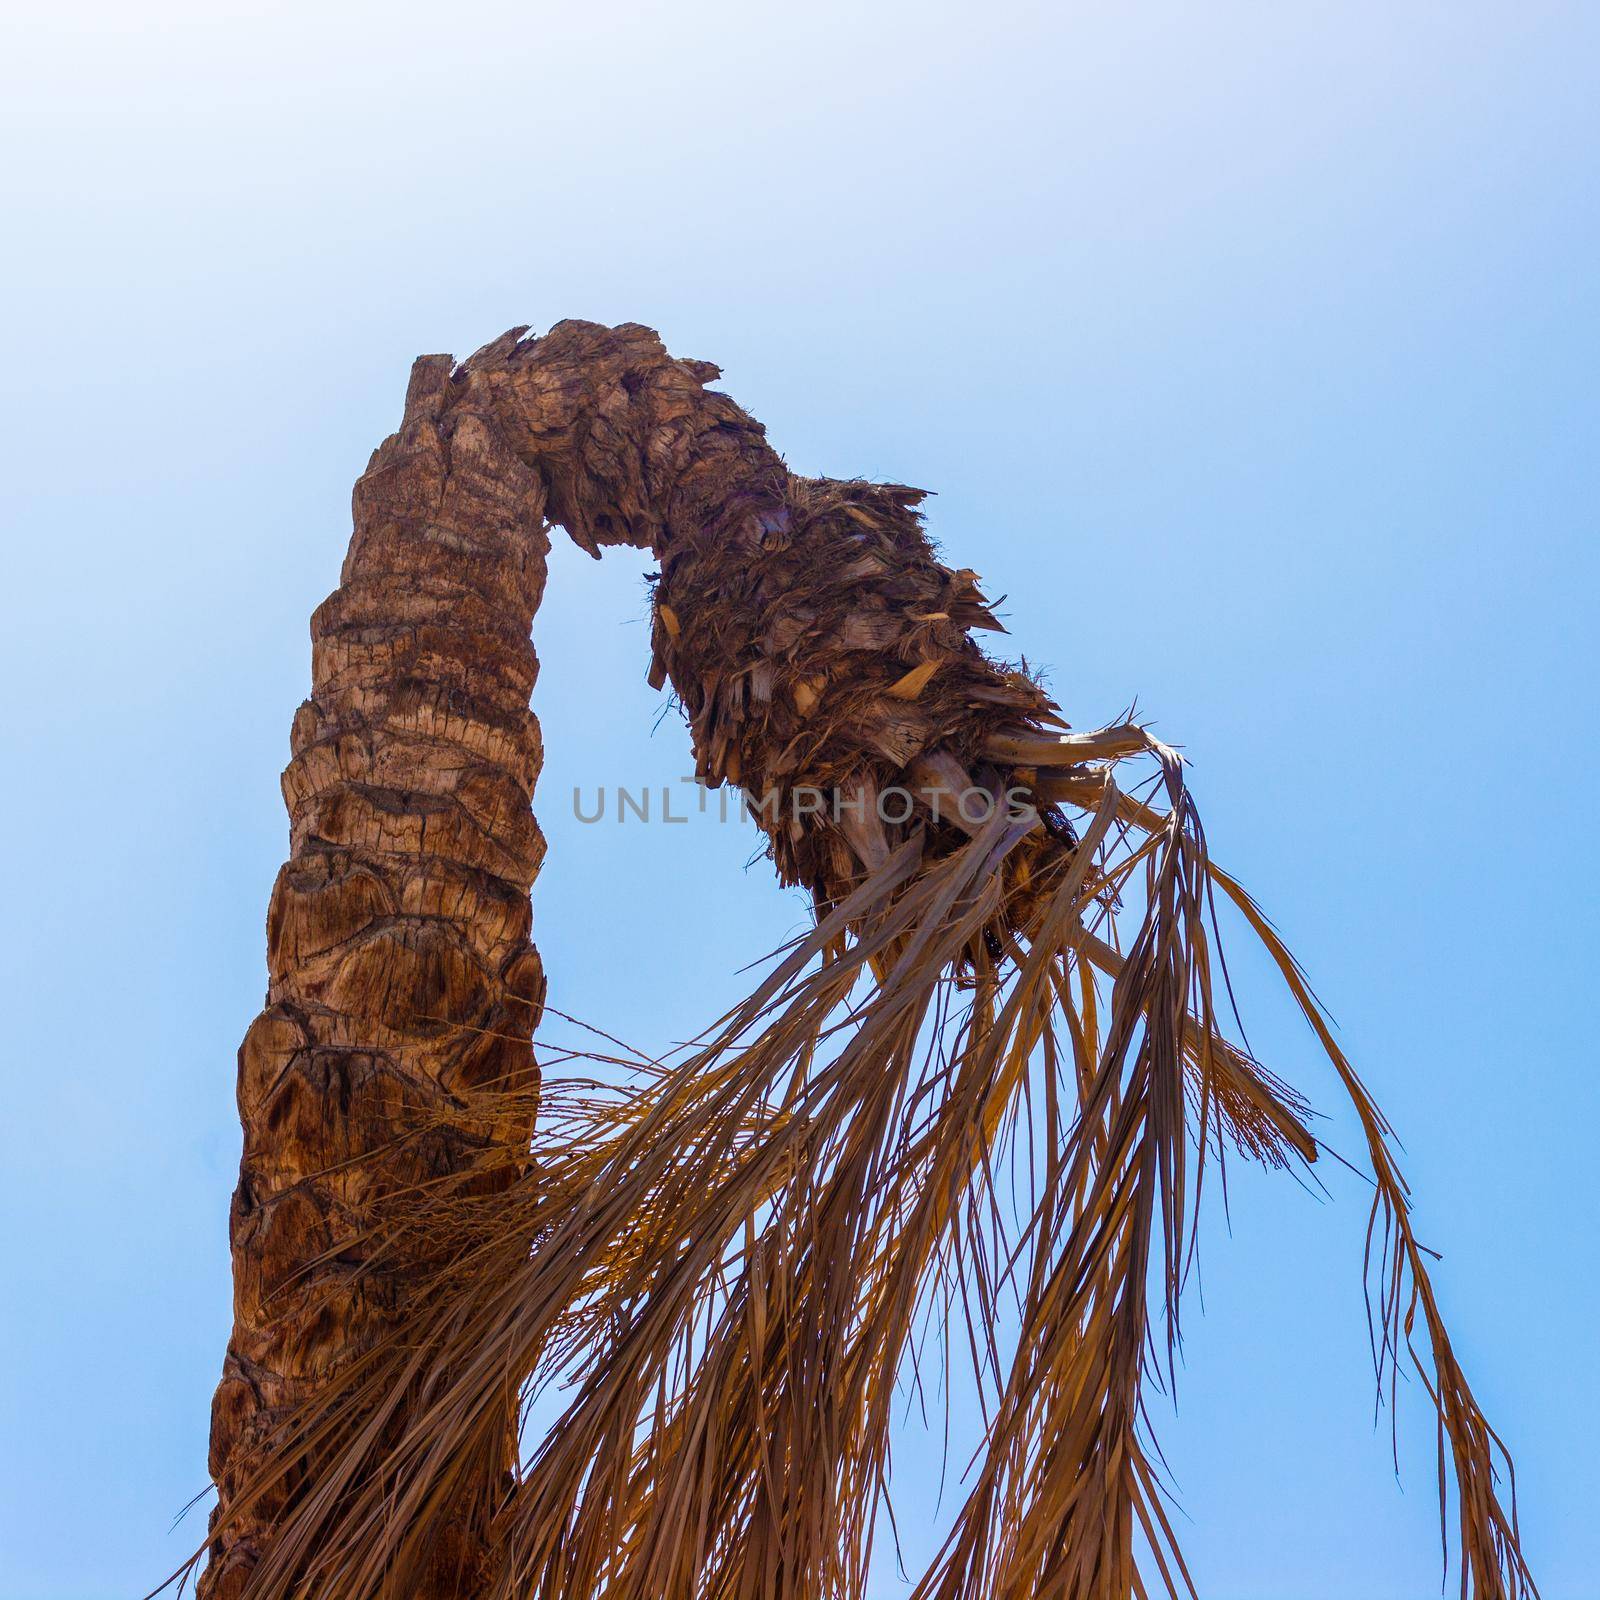 bent palm tree. Dead palm, dry dead palm leaves with blue vibrant sky.